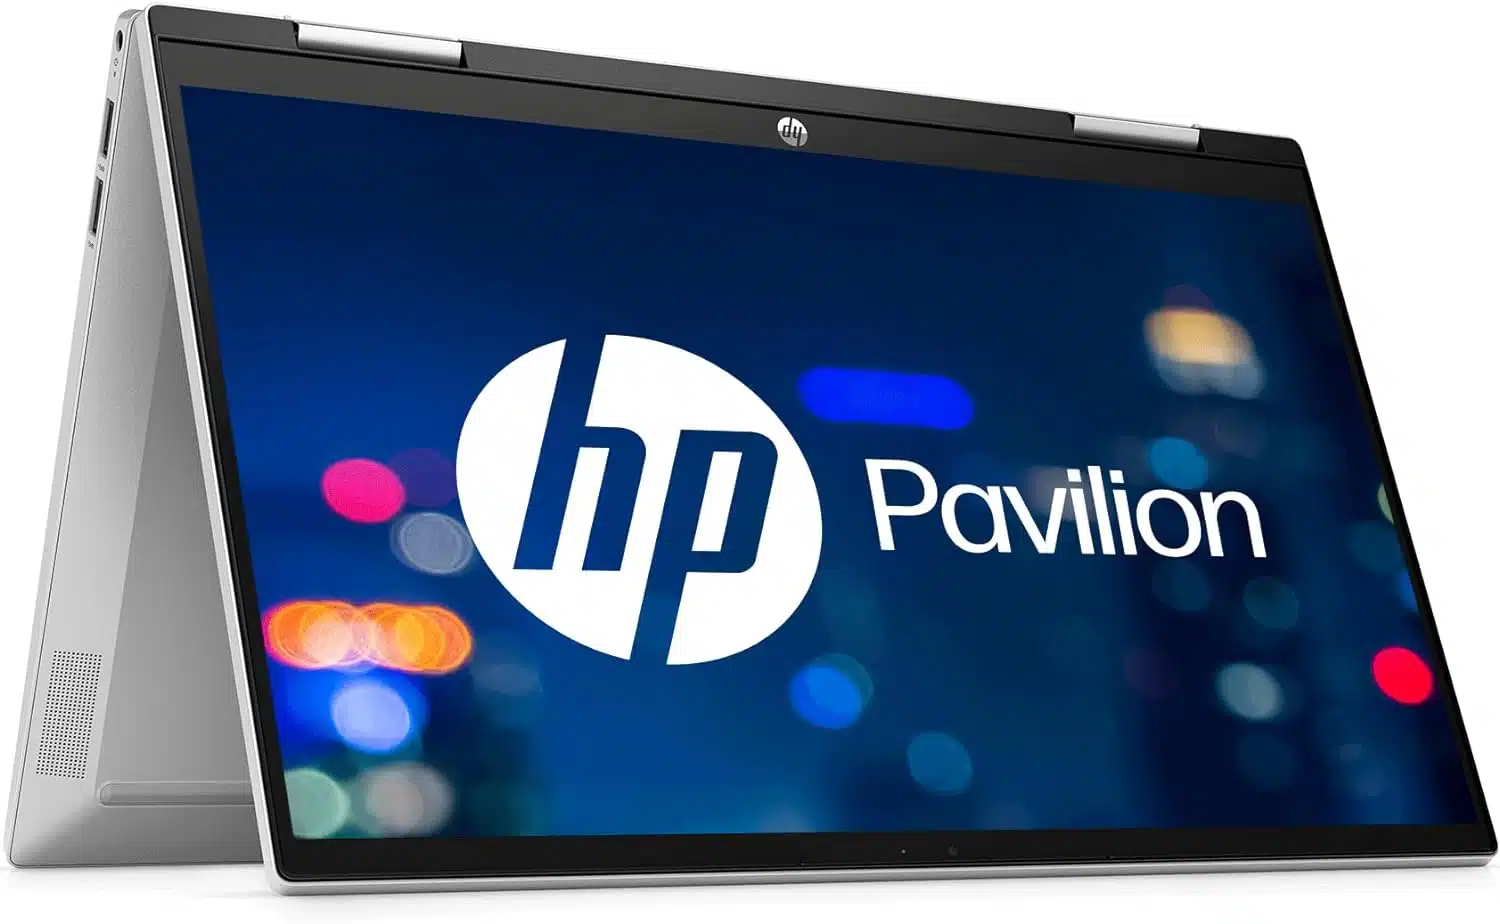 Hp Pavilion X360 11Th Gen Intel Core I3 14 Inches Fhd Multitouch 2-in-1 Laptop(8Gb Ram/512Gb Ssd/BO/Windows 11 Home/Fpr/Backlit Kb/Pen/Alexa/Uhd Graphics/Ms Office/Natural Silver/1.52Kg) 14-Dy0207Tu